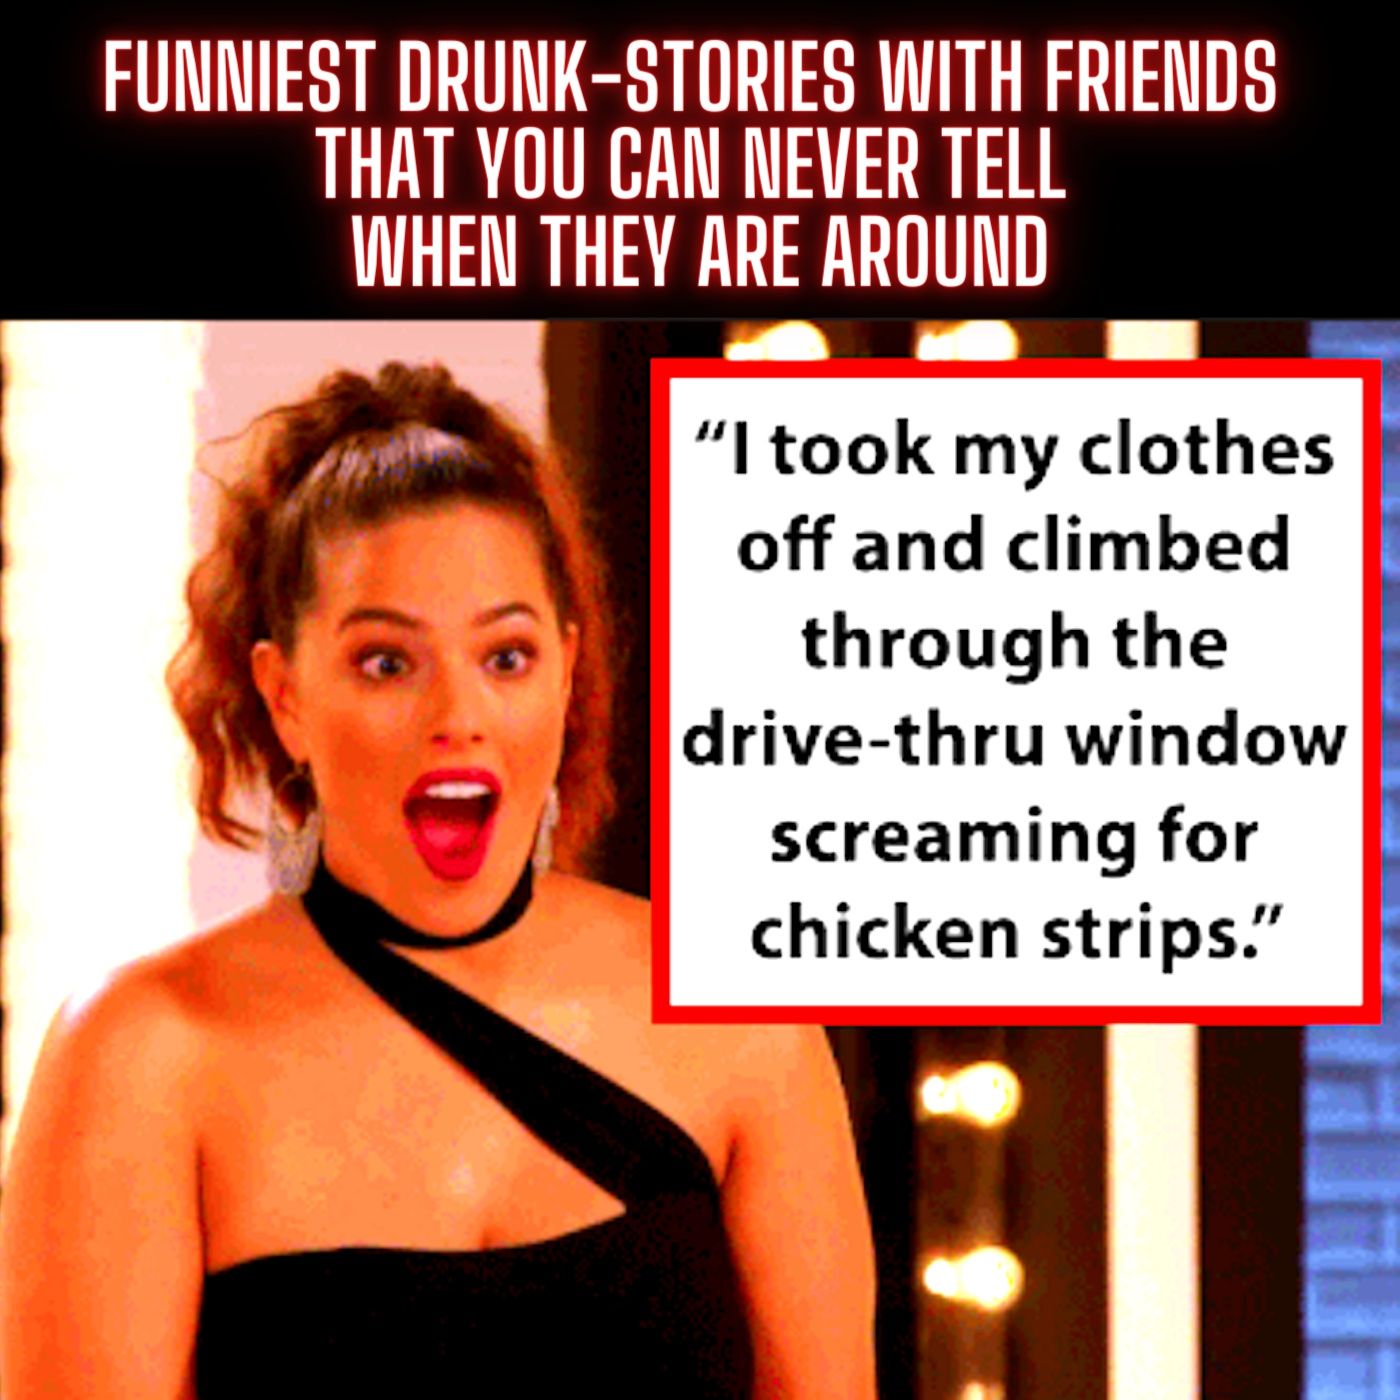 Funniest Drunk-Stories With Friends That You Can Never Tell When They Are Around